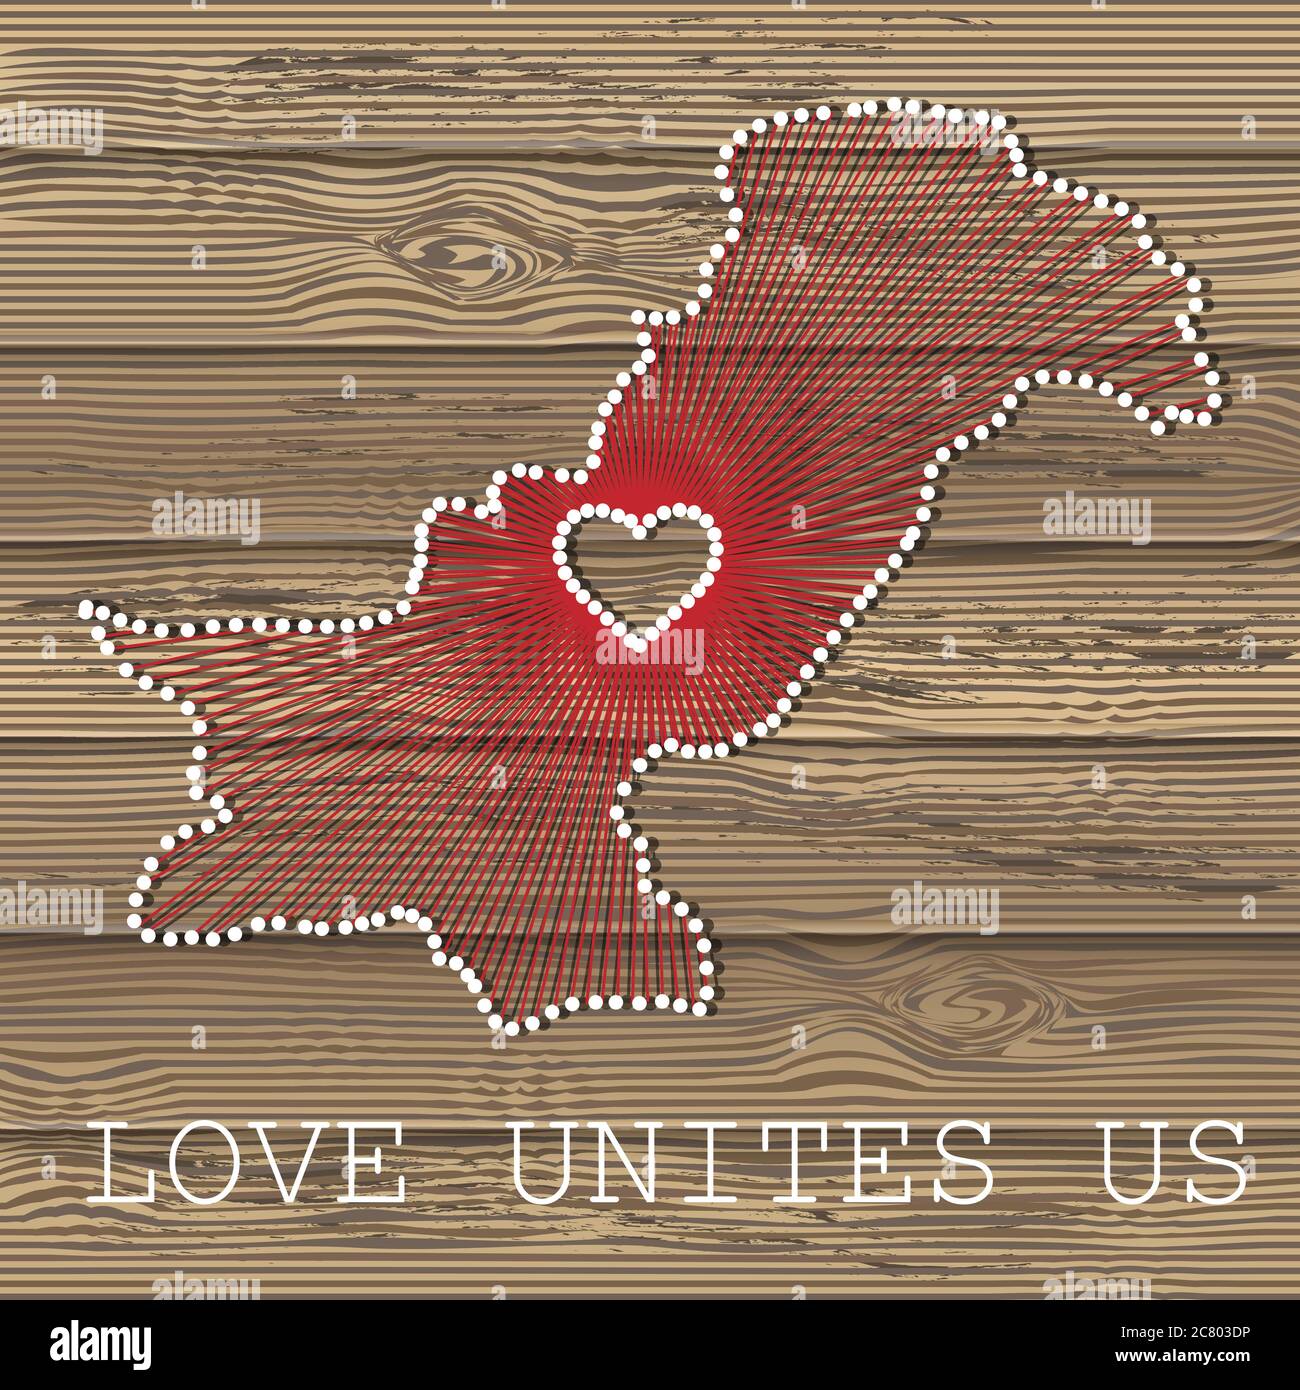 Pakistan art vector map with heart. String art, yarn and pins on wooden planks texture. Love unites us. Message of love. Pakistan art map Stock Vector